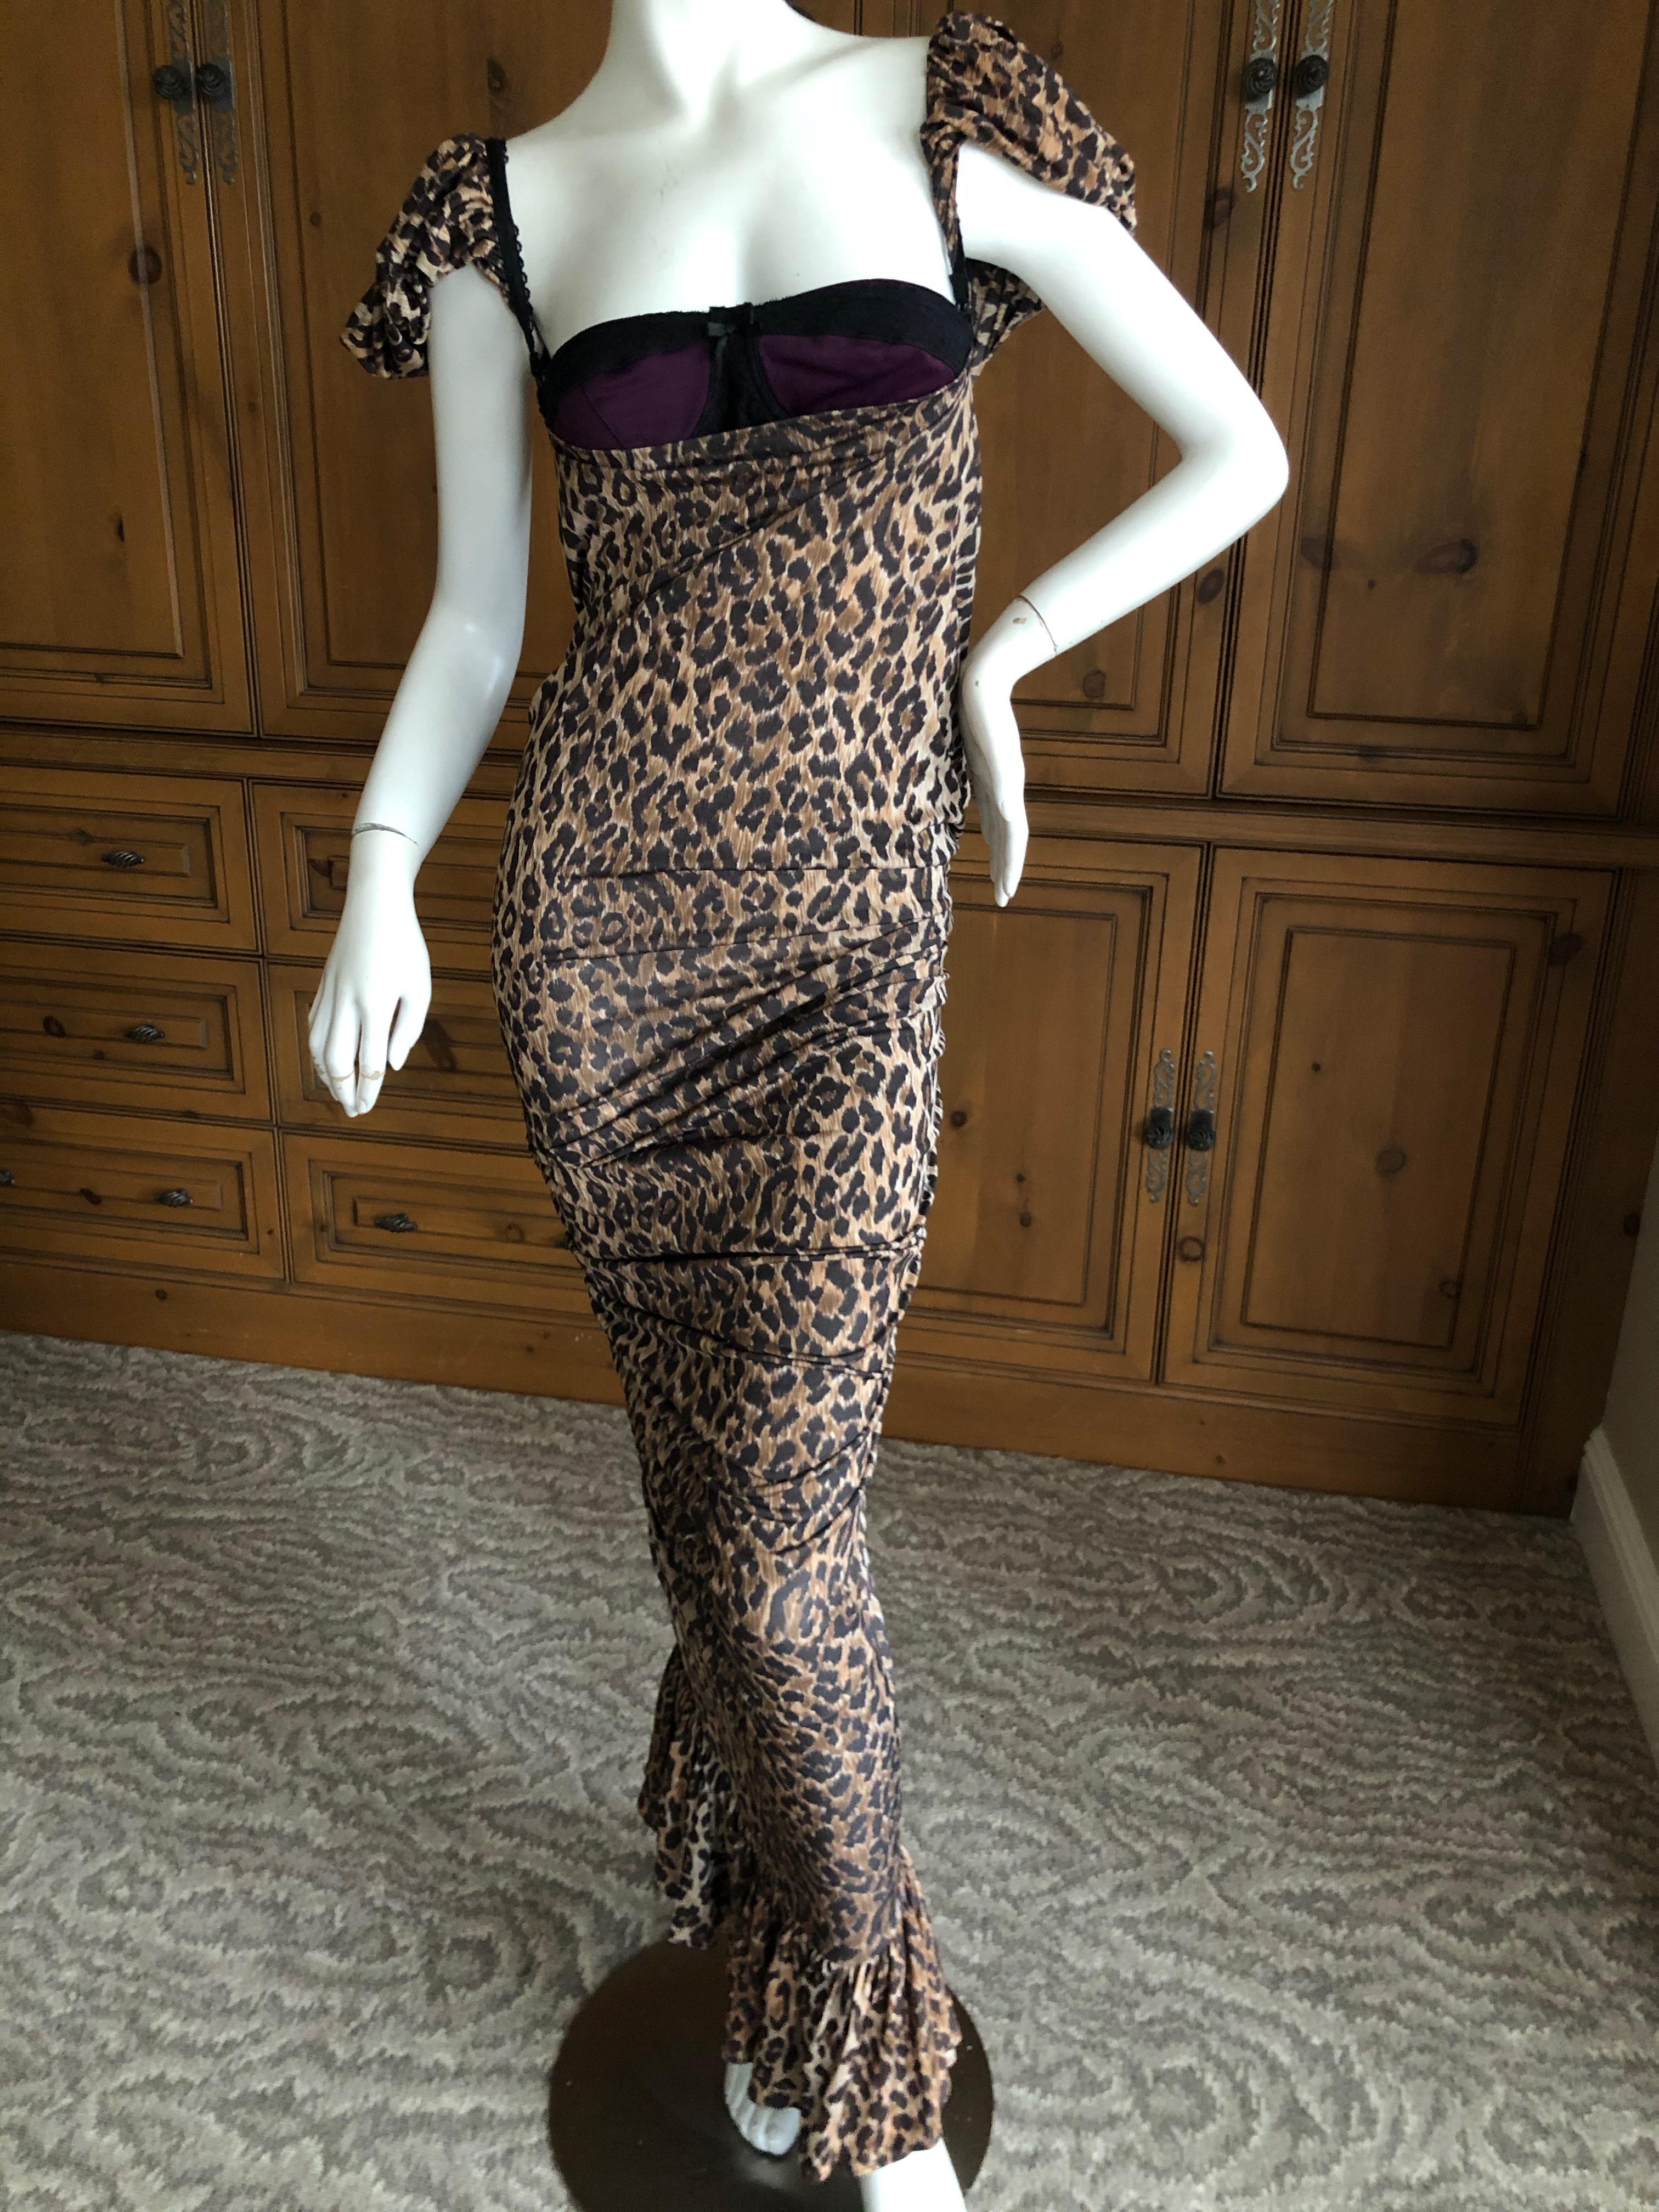 Dolce & Gabbana for D&G Vintage Leopard Print Cocktail Dress with Attached Bra
This is so pretty, please use the zoom to see details.
  There is  a lot of stretch , but I didn't force it closed on my mannequin
Marked sz 44, I would say it's 4-6